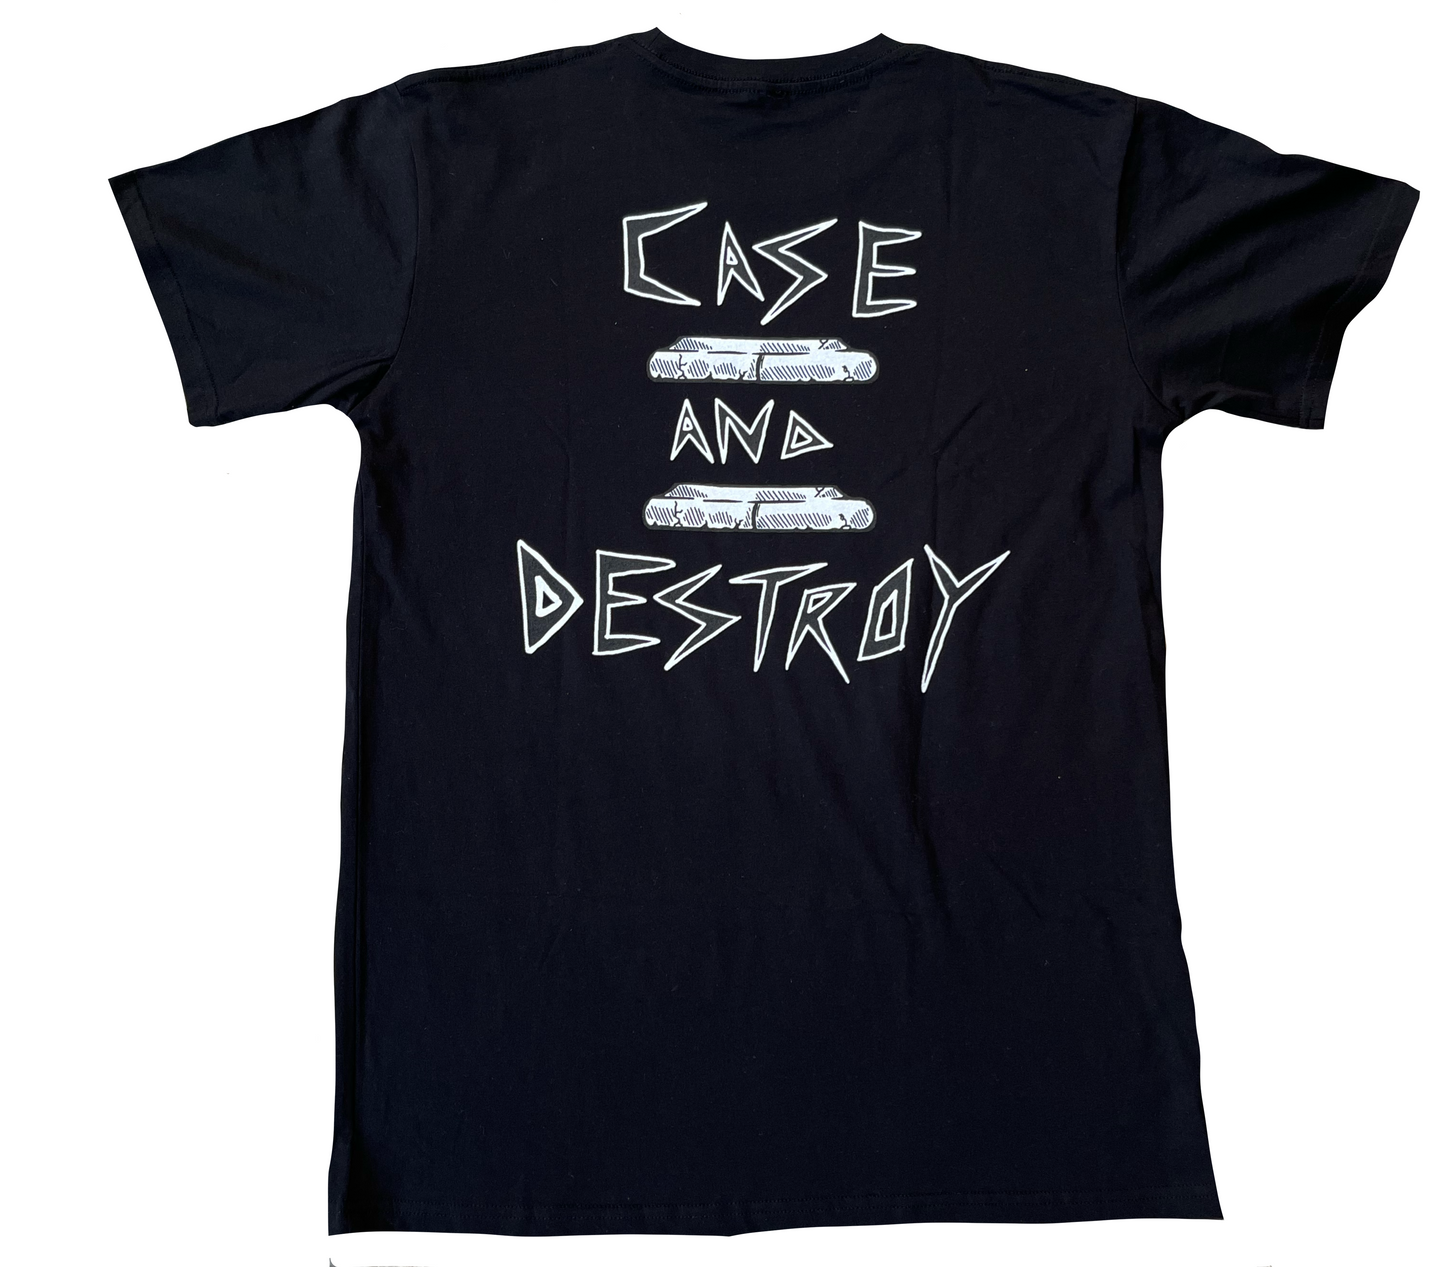 Case and Destroy Tee